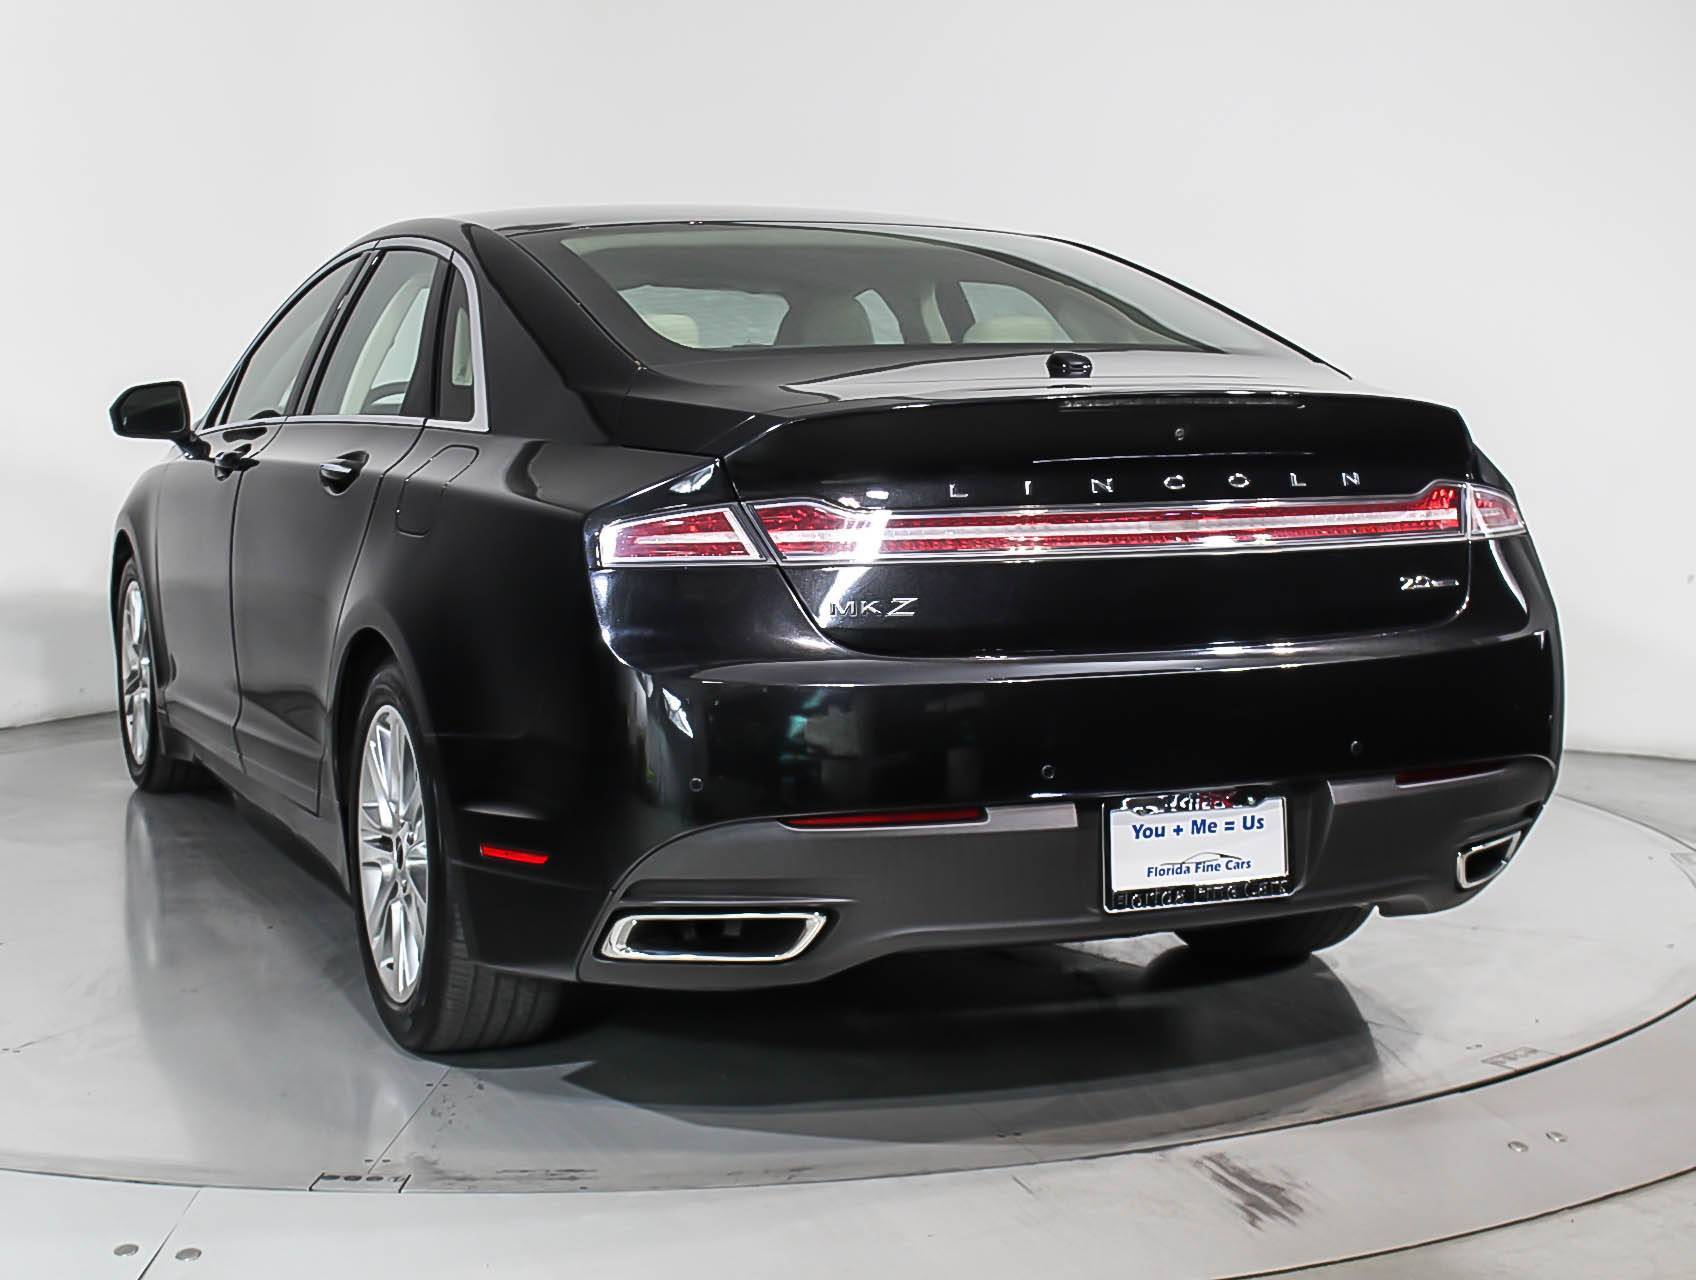 Florida Fine Cars - Used LINCOLN MKZ 2015 HOLLYWOOD 